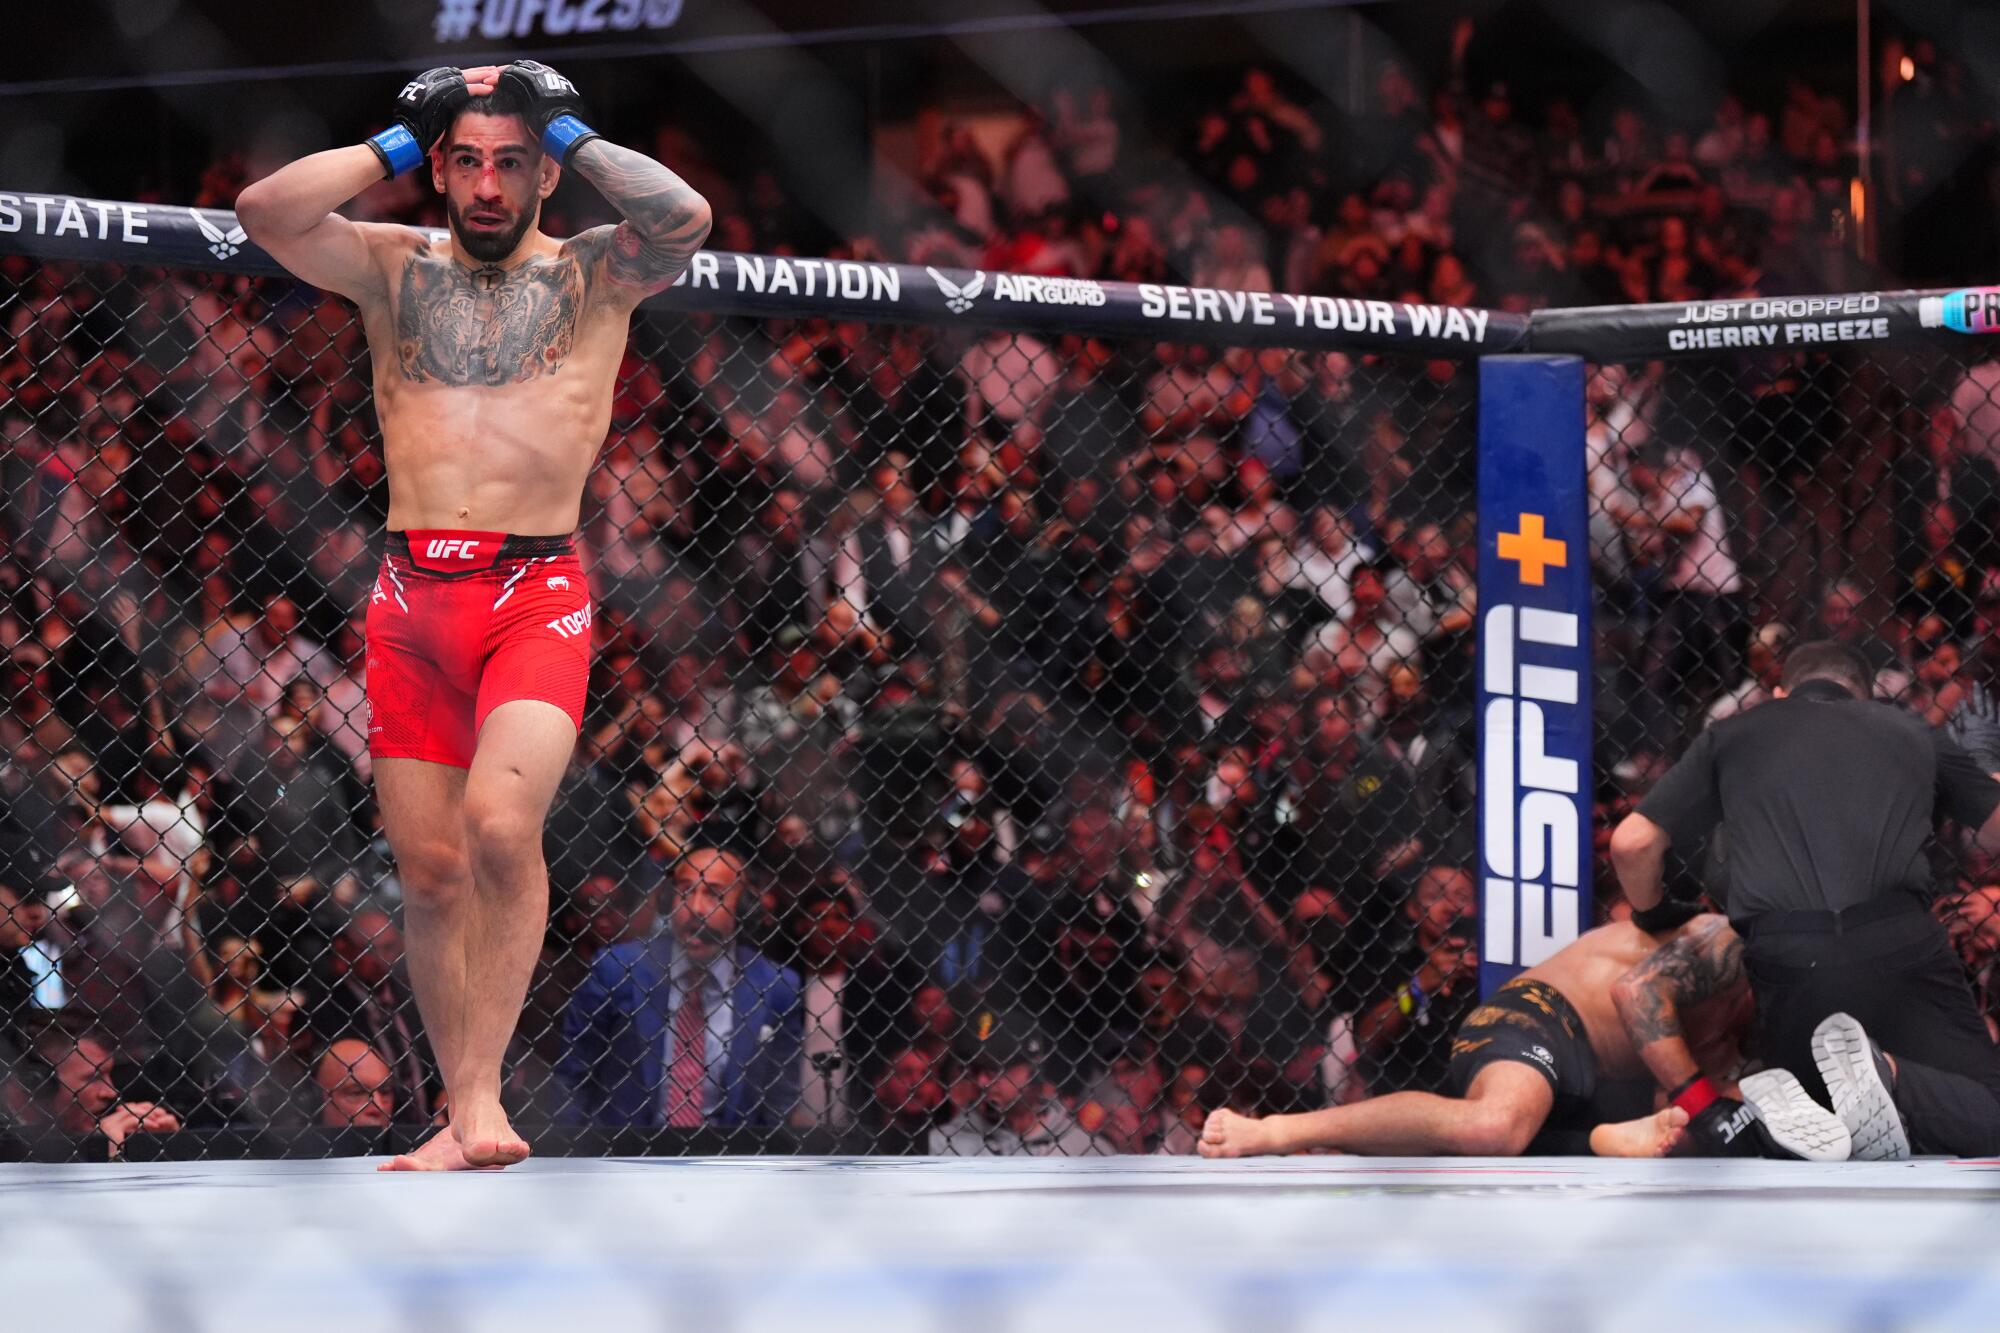 Ilia Topuria reacts immediately after his knockout victory over Alexander Volkanovski.